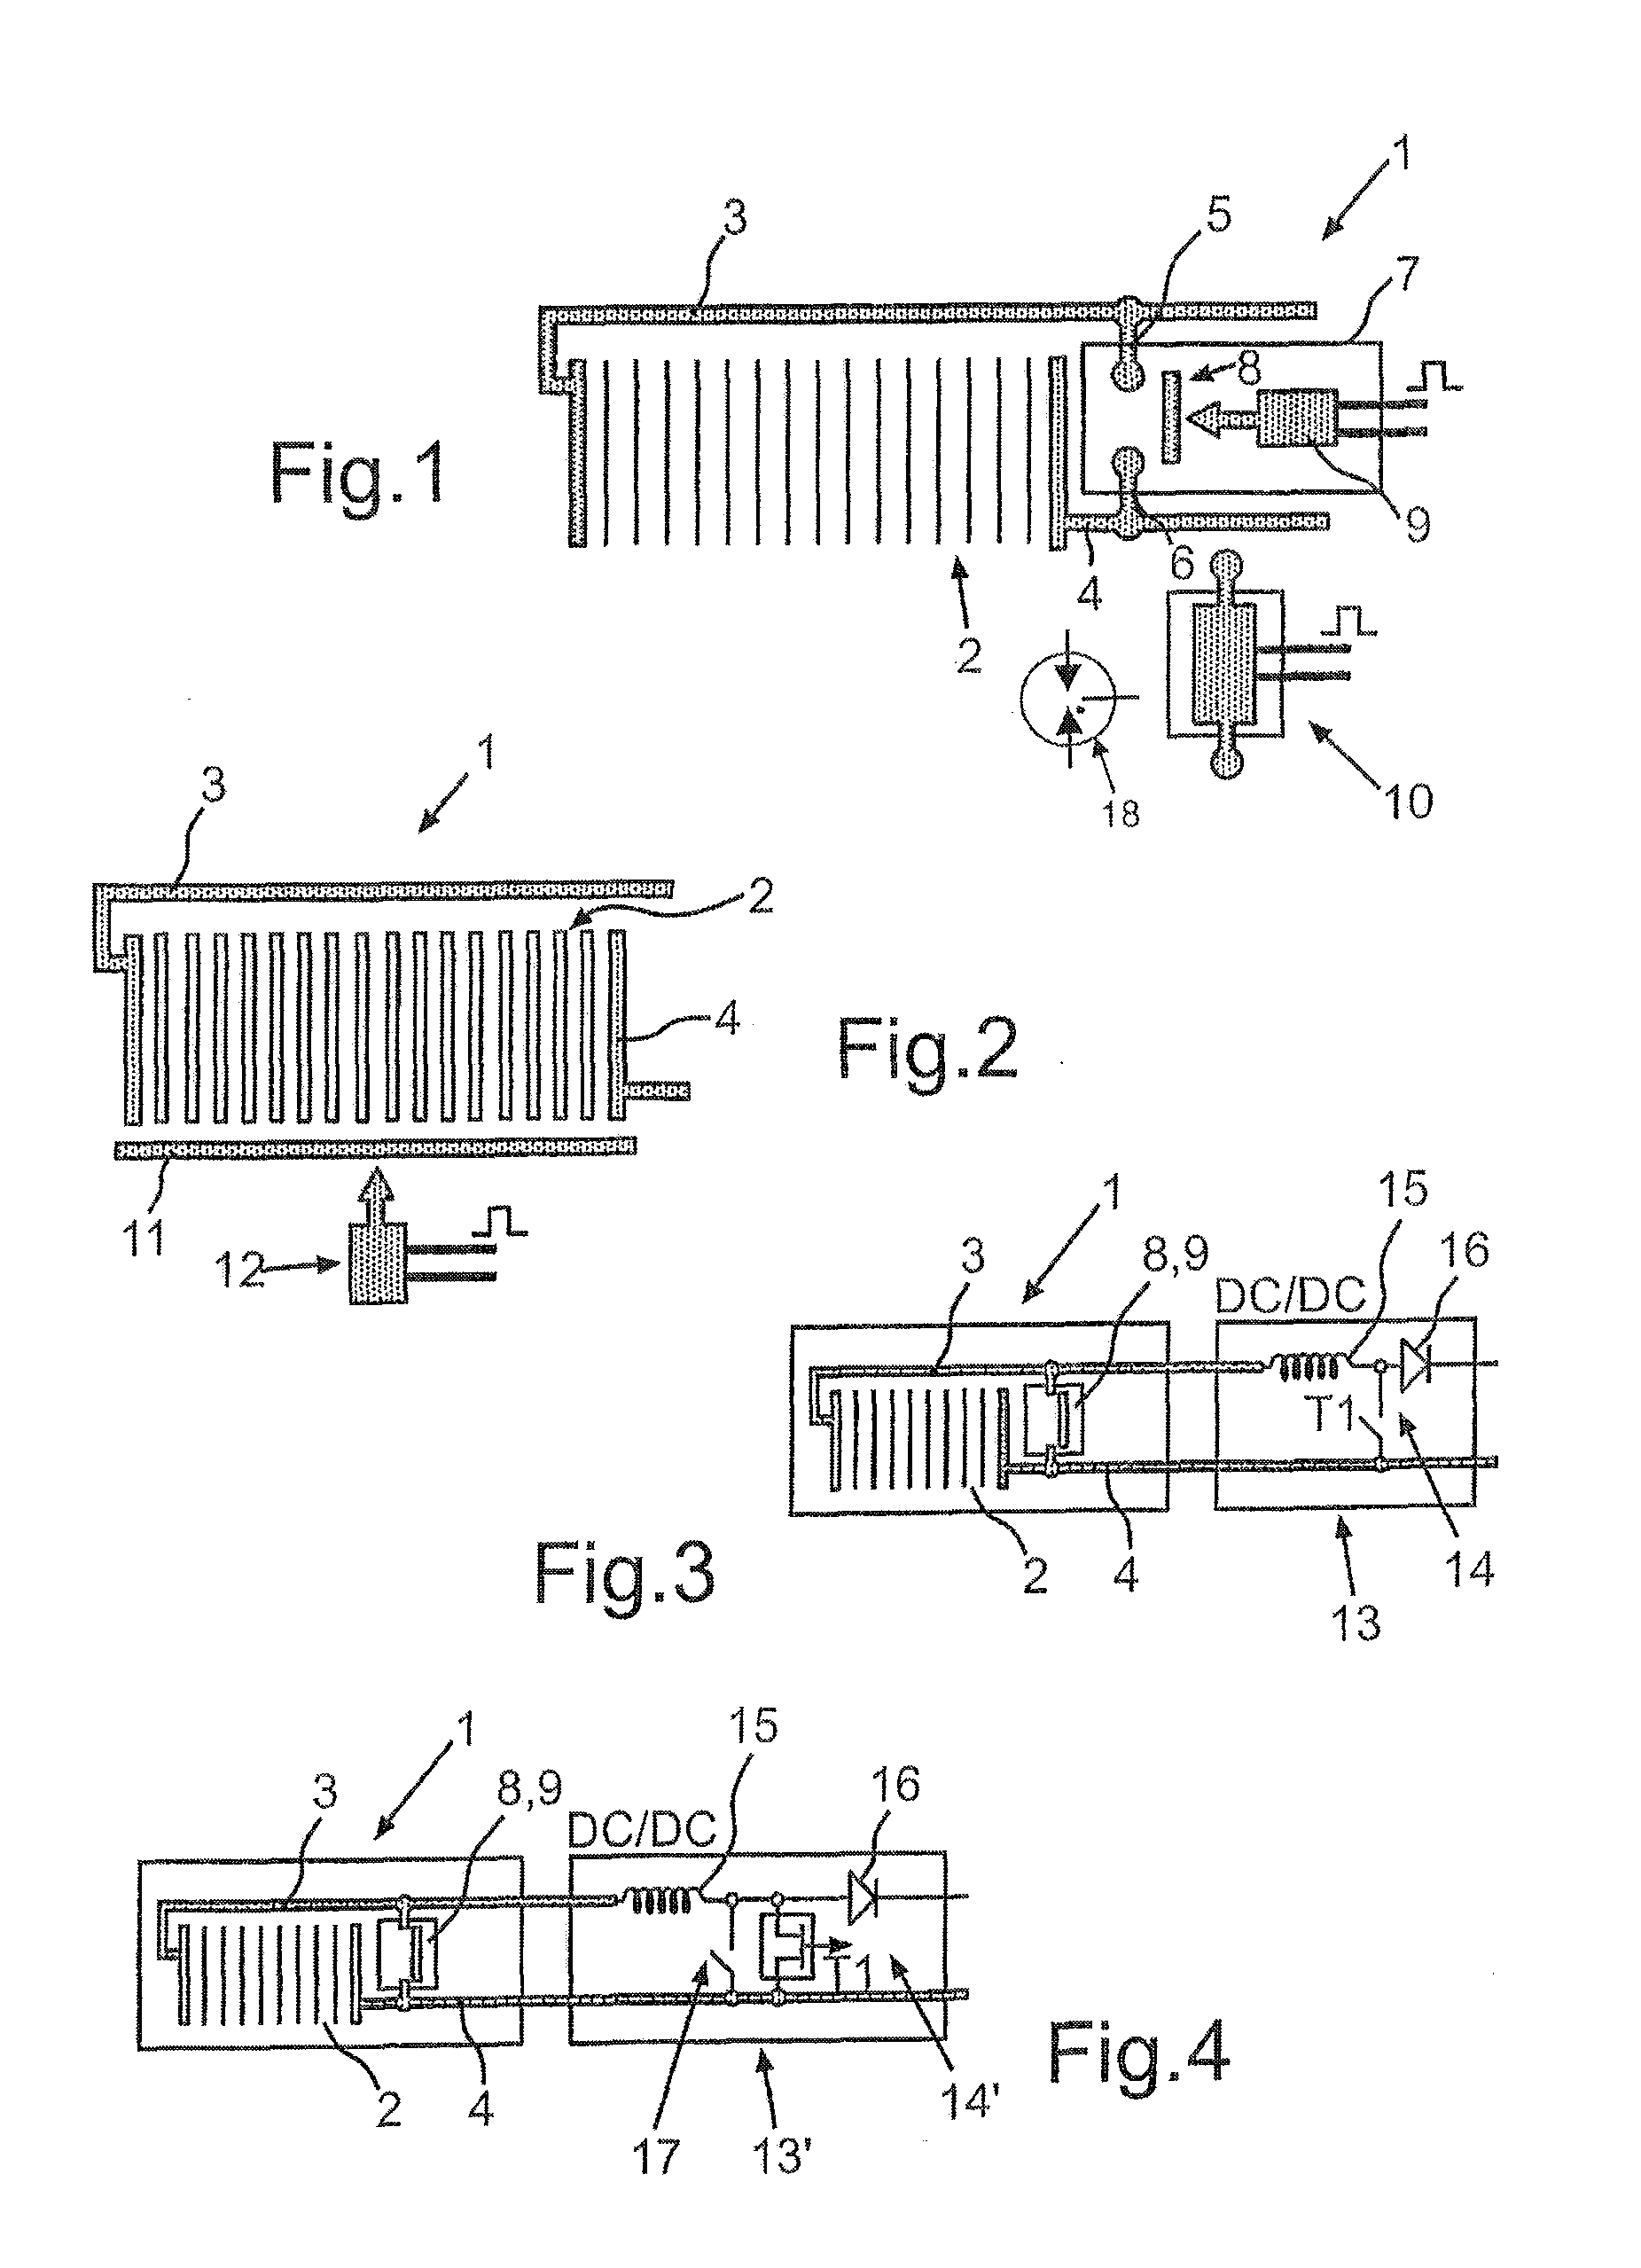 Fuel Cell System With at Least One Fuel Cell